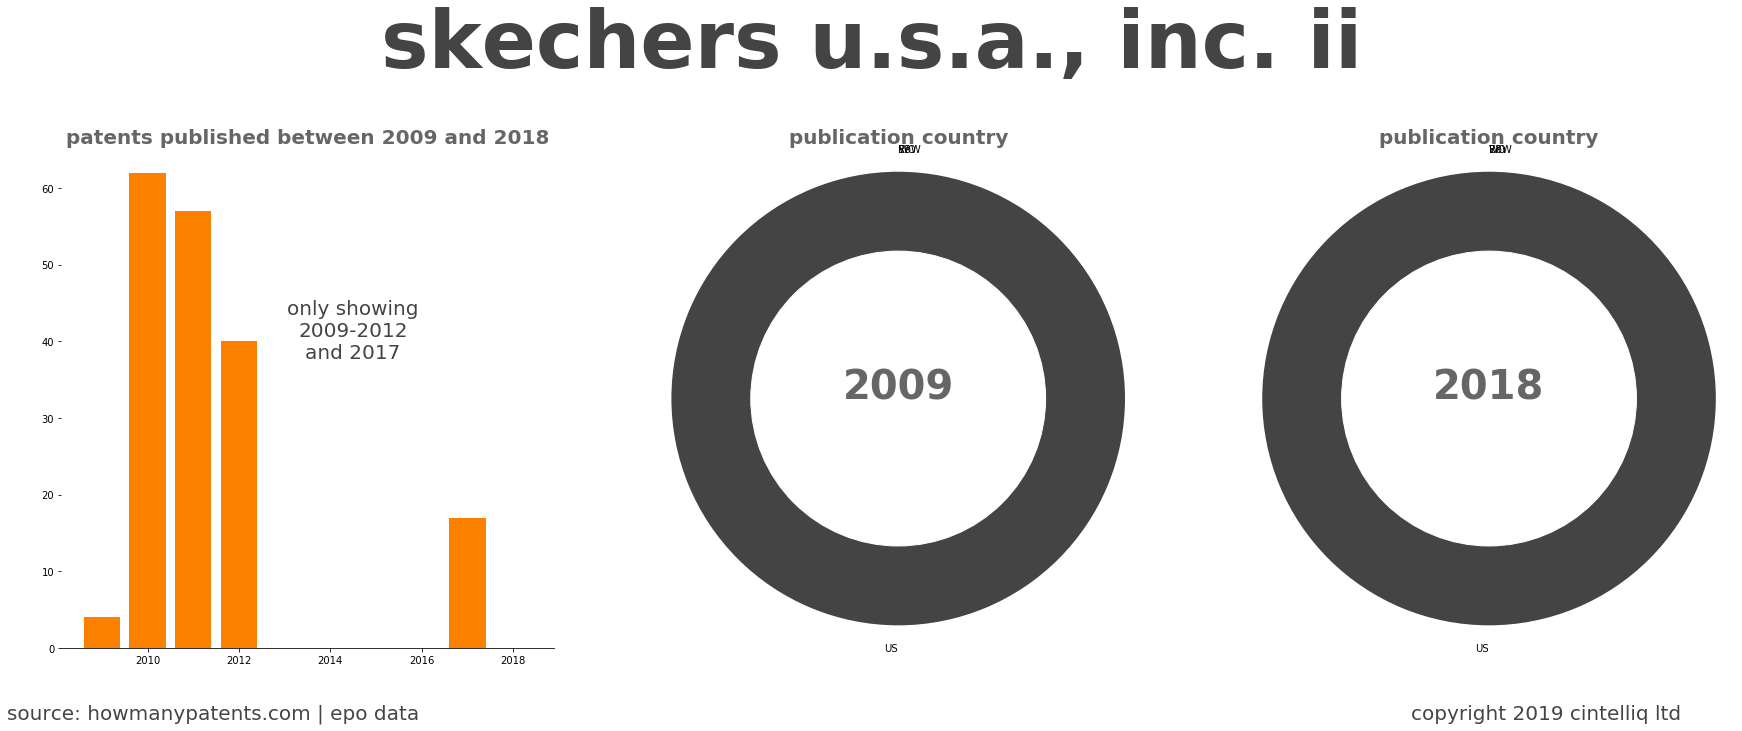 summary of patents for Skechers U.S.A., Inc. Ii